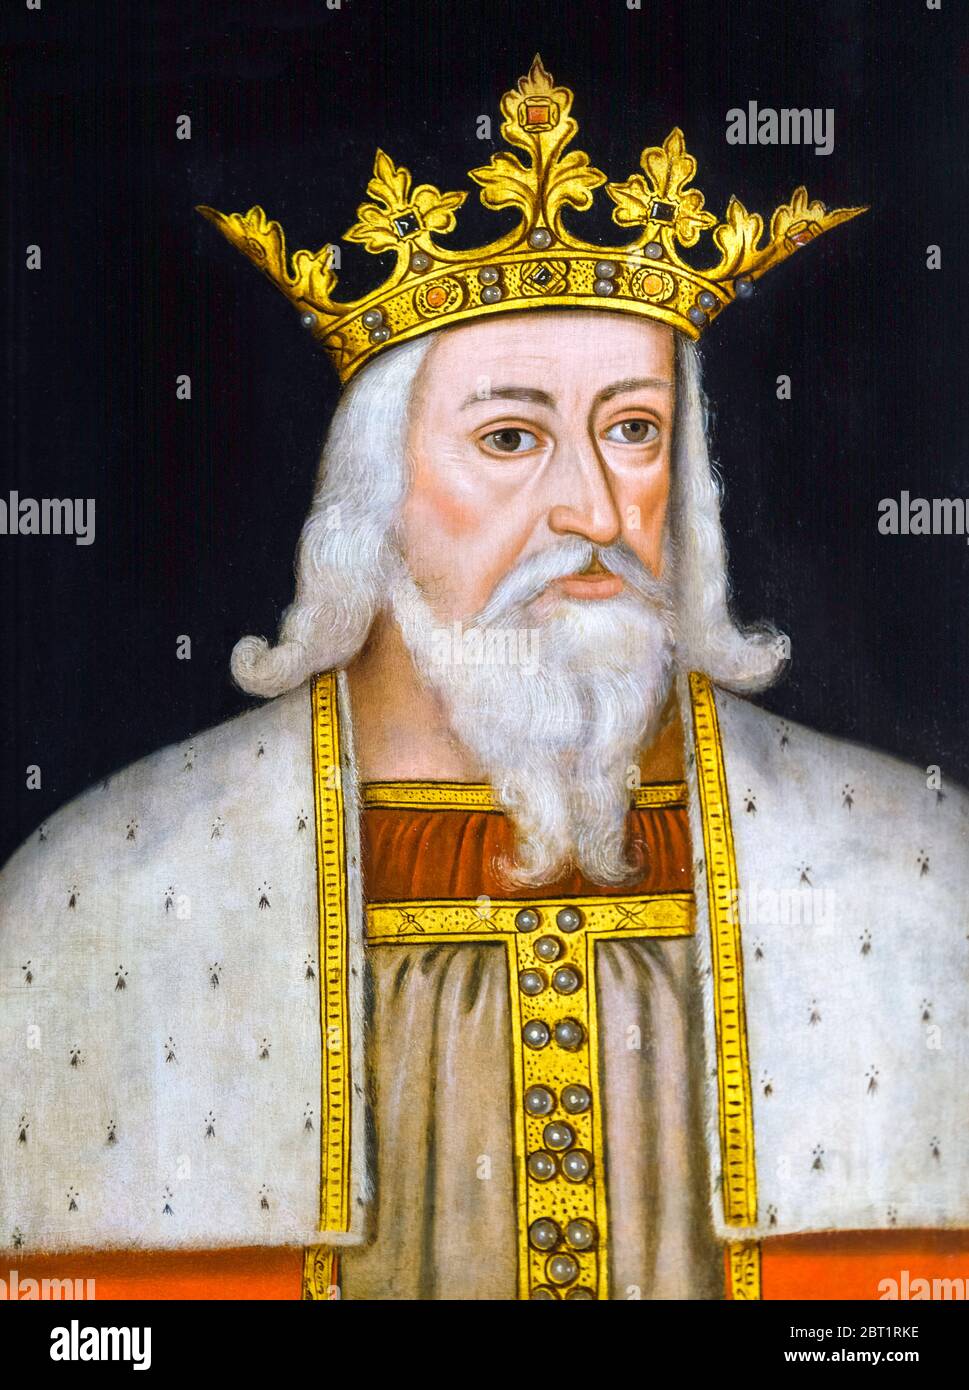 King Edward III of England (1312-1377), portrait painting, oil on panel, early 17thC by unknown artist Stock Photo